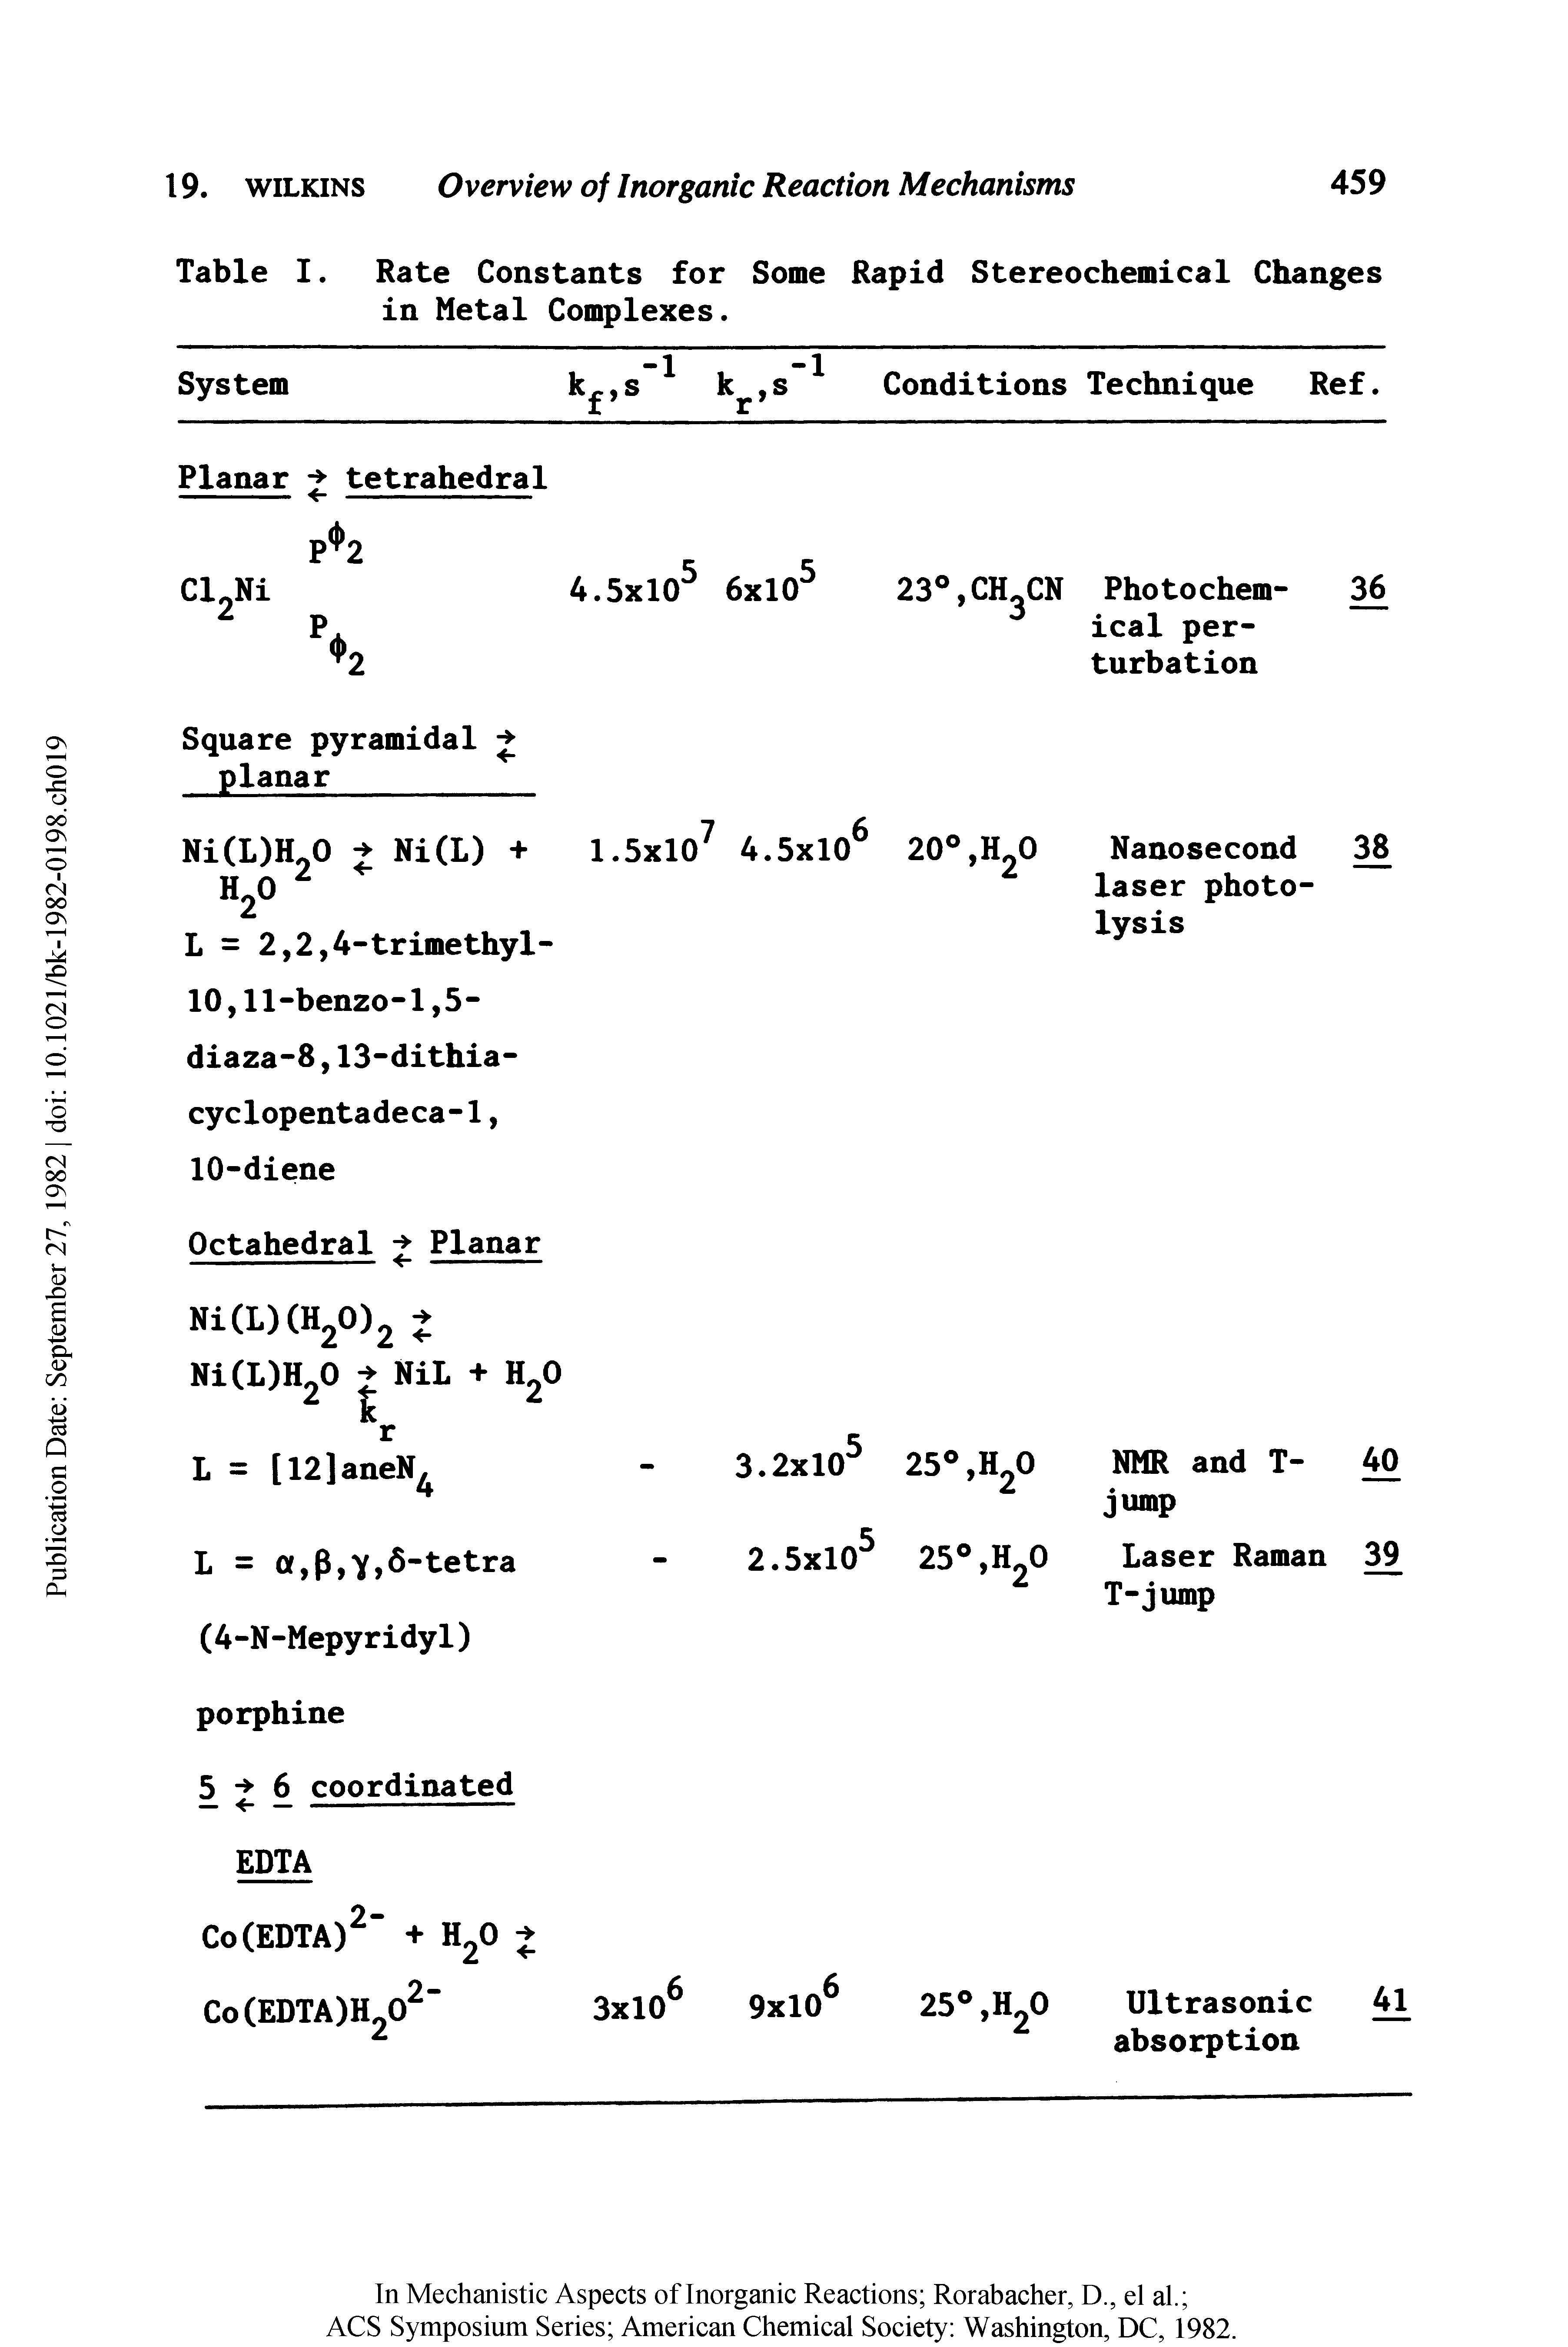 Table I. Rate Constants for Some Rapid Stereochemical Changes in Metal Complexes.